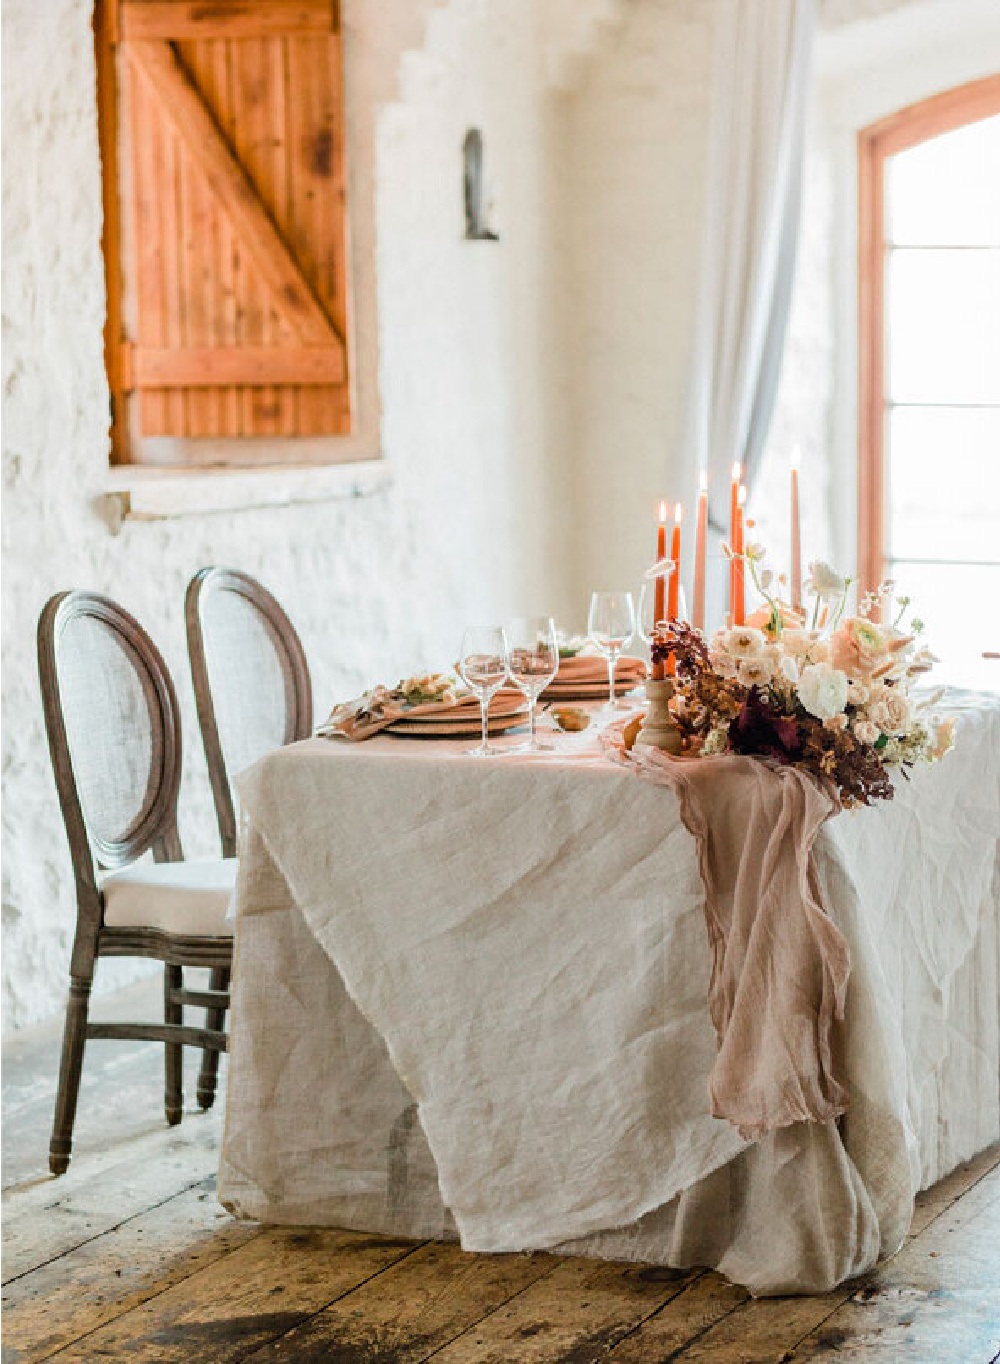 Private rustic wedding table for bridge and groom - from THE ART OF THE WEDDING - Relais & Chateaux. #weddingdesign #frenchcountryweddings